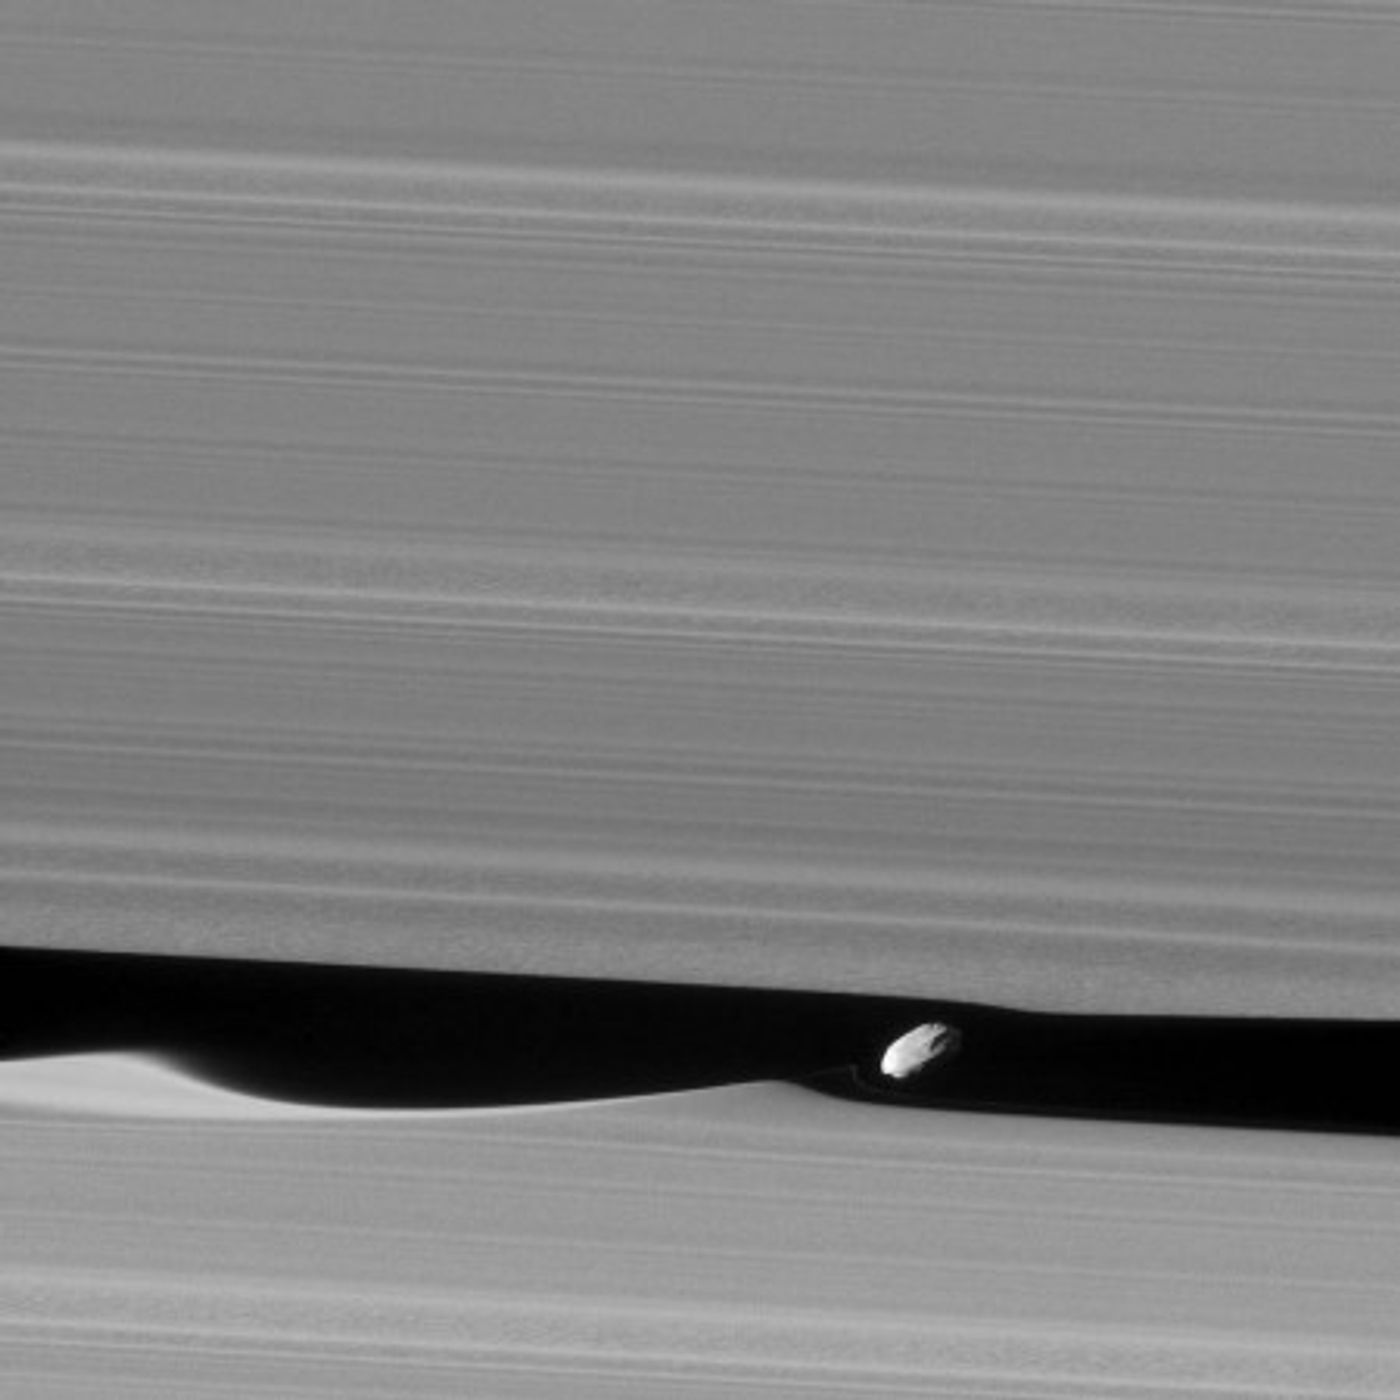 A close-up of Daphnis and the waves it makes in Saturn's rings.